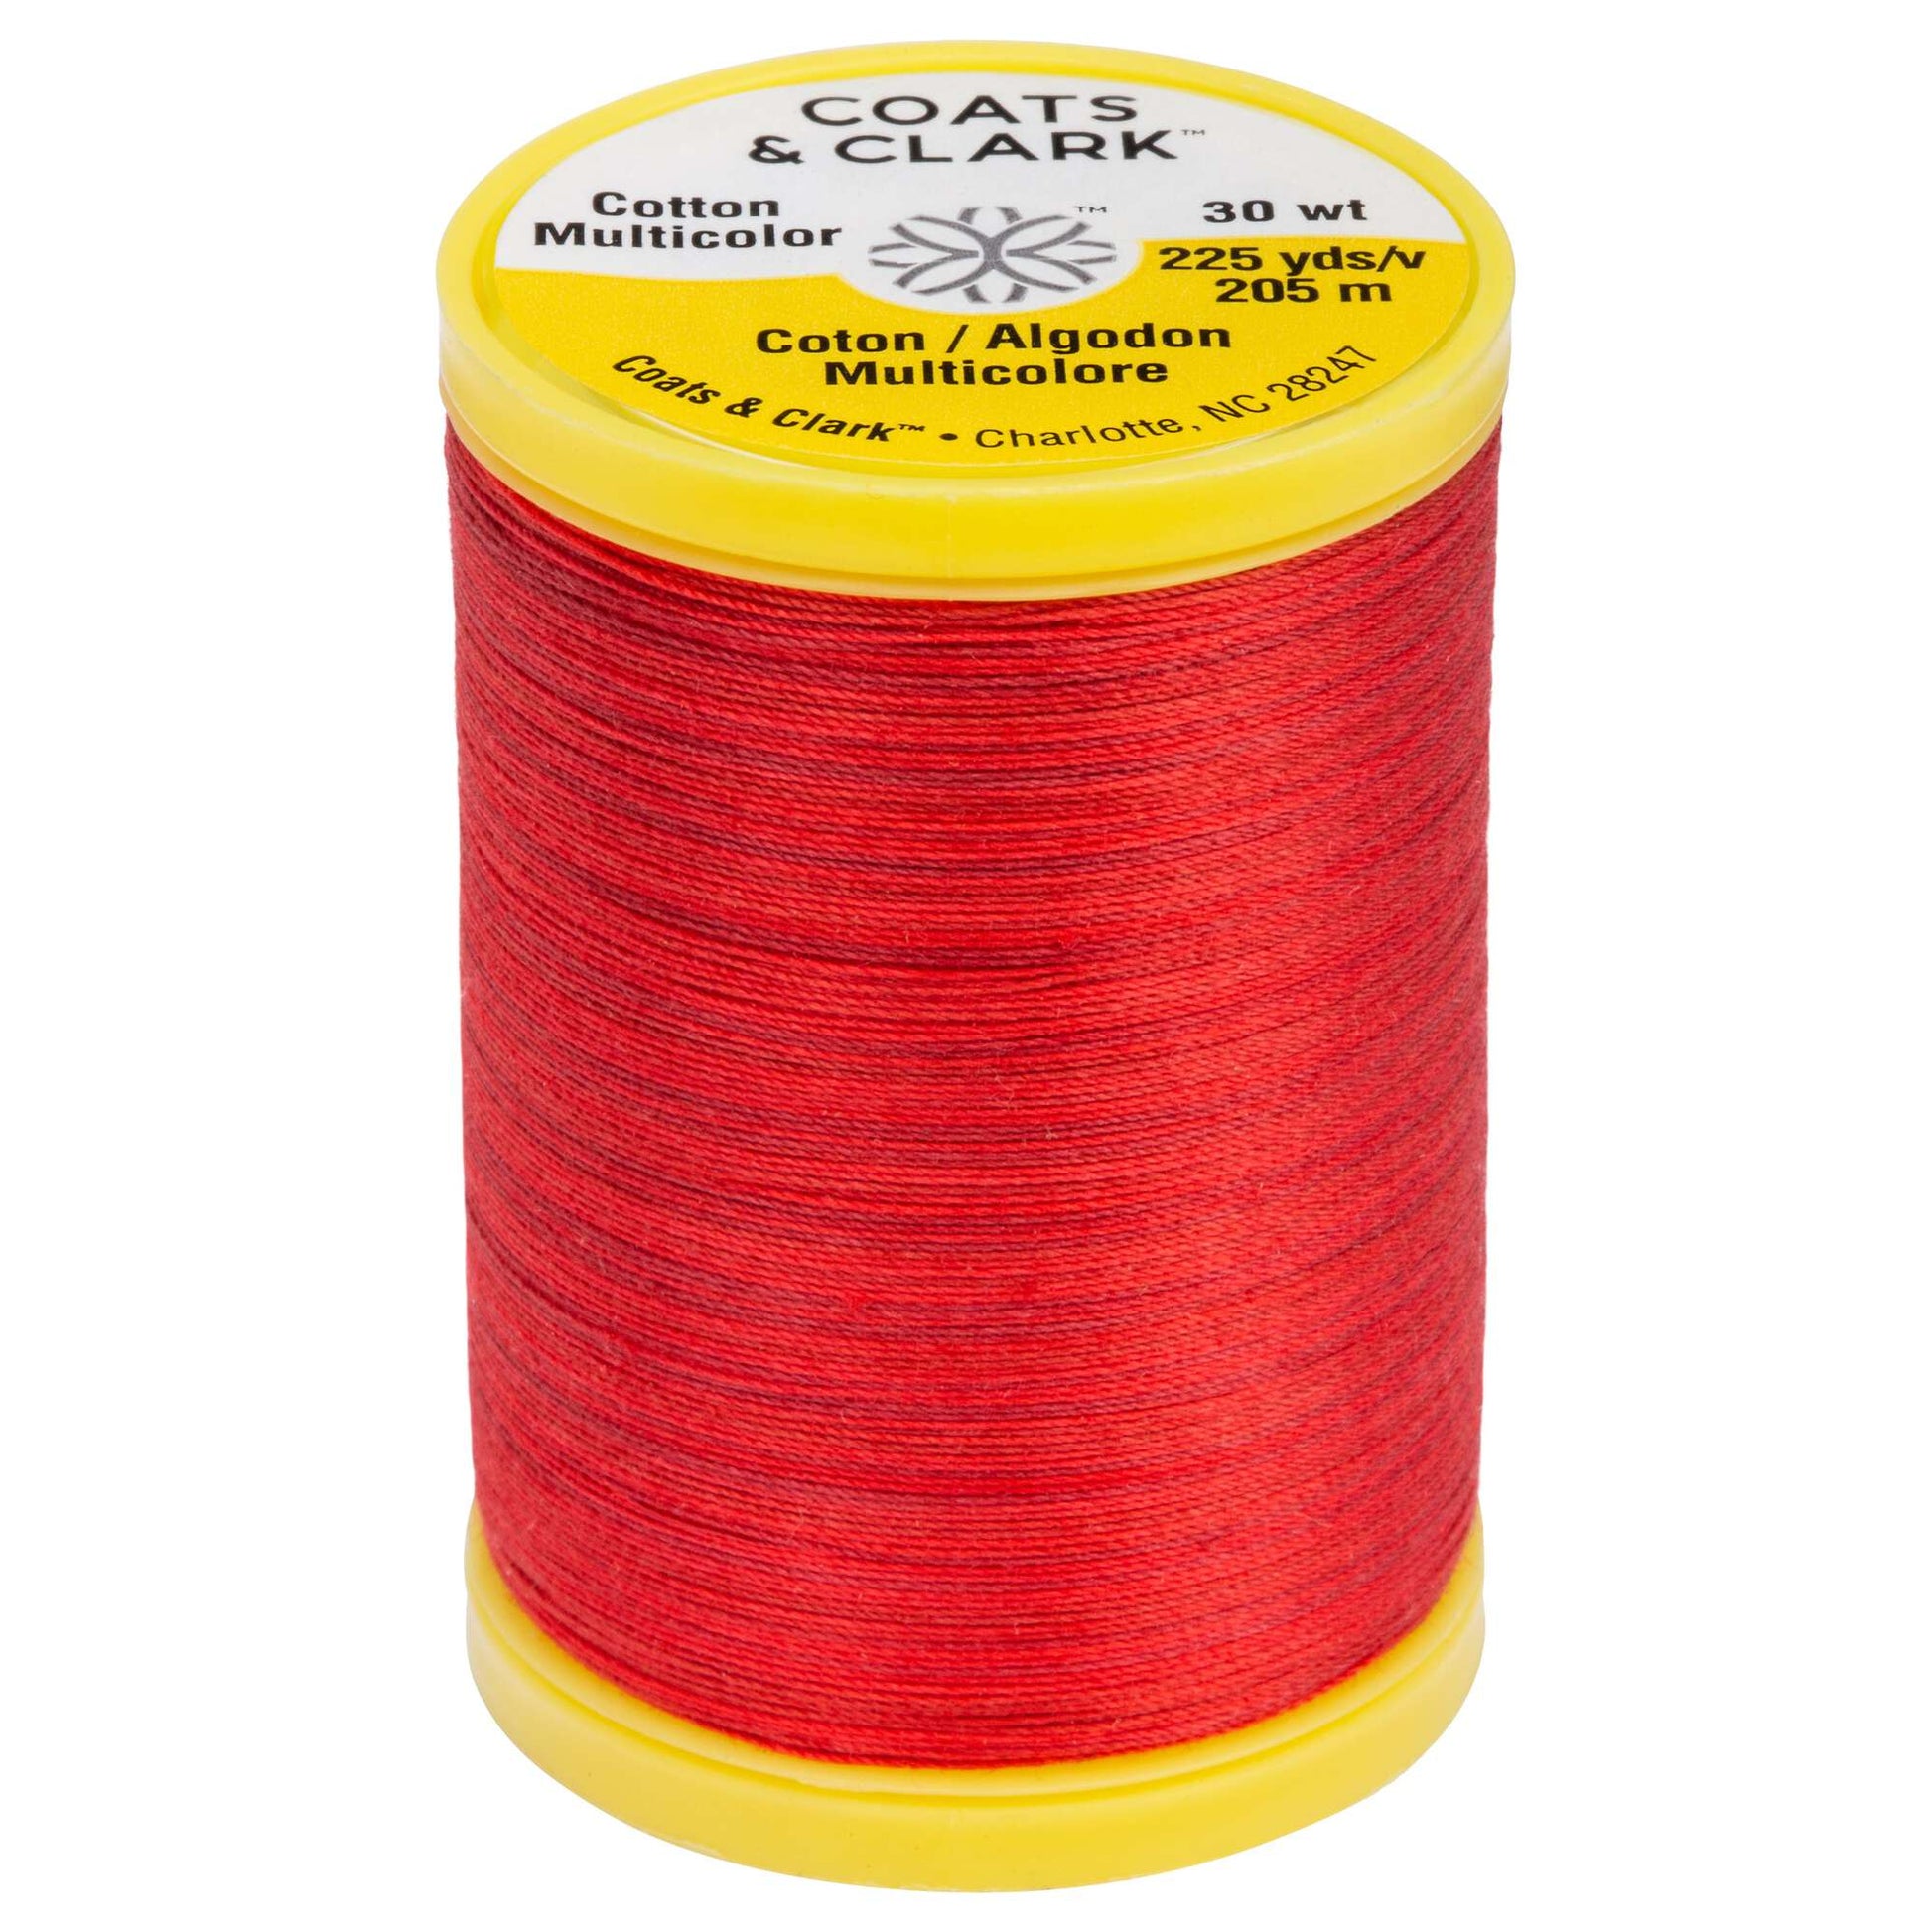 Coats & Clark Cotton Machine Quilting Multicolor Thread (225 Yards) Cherry Tomatoes